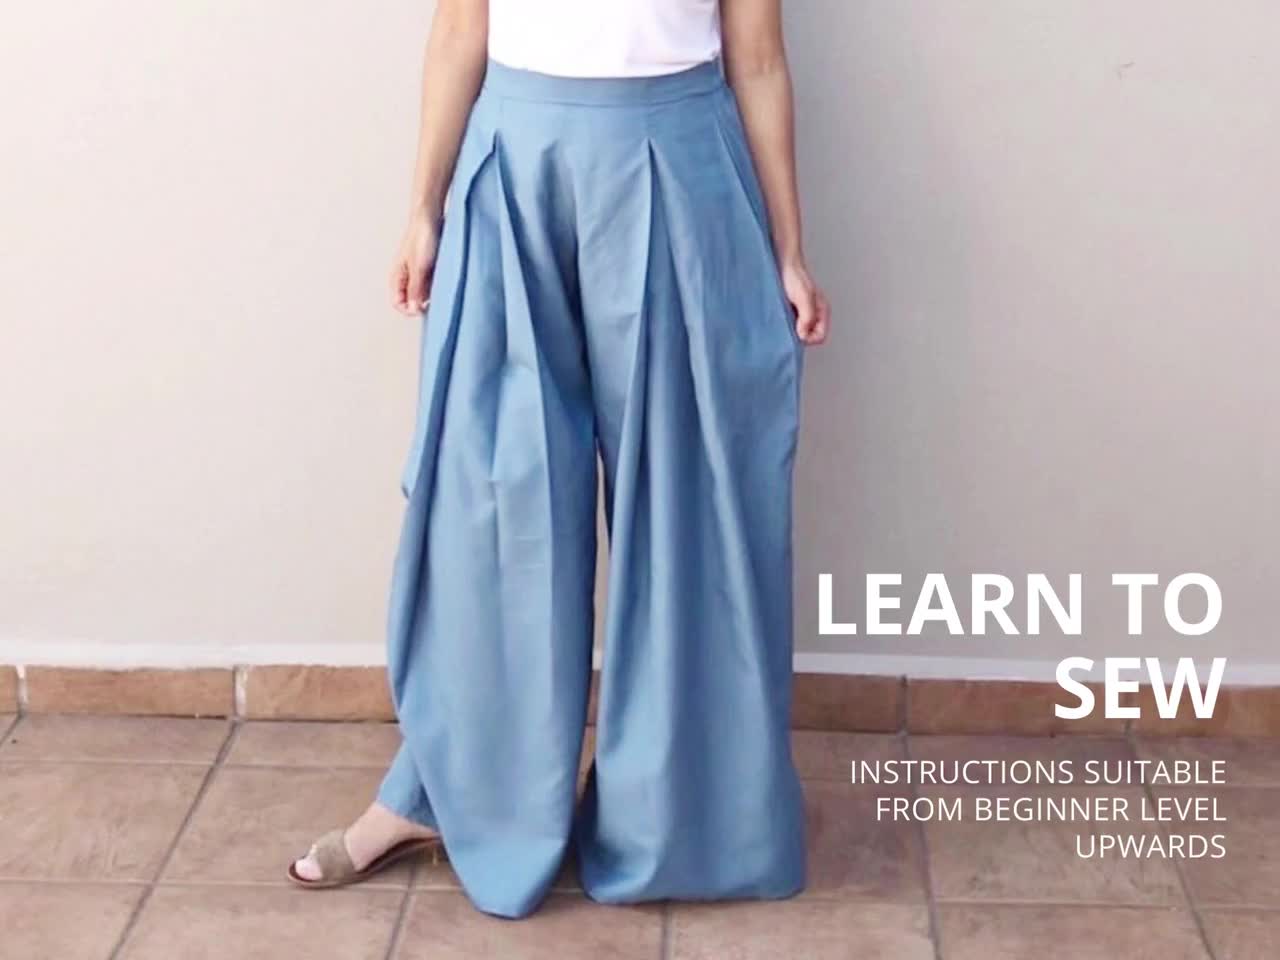 Details more than 222 pleated trousers sewing pattern